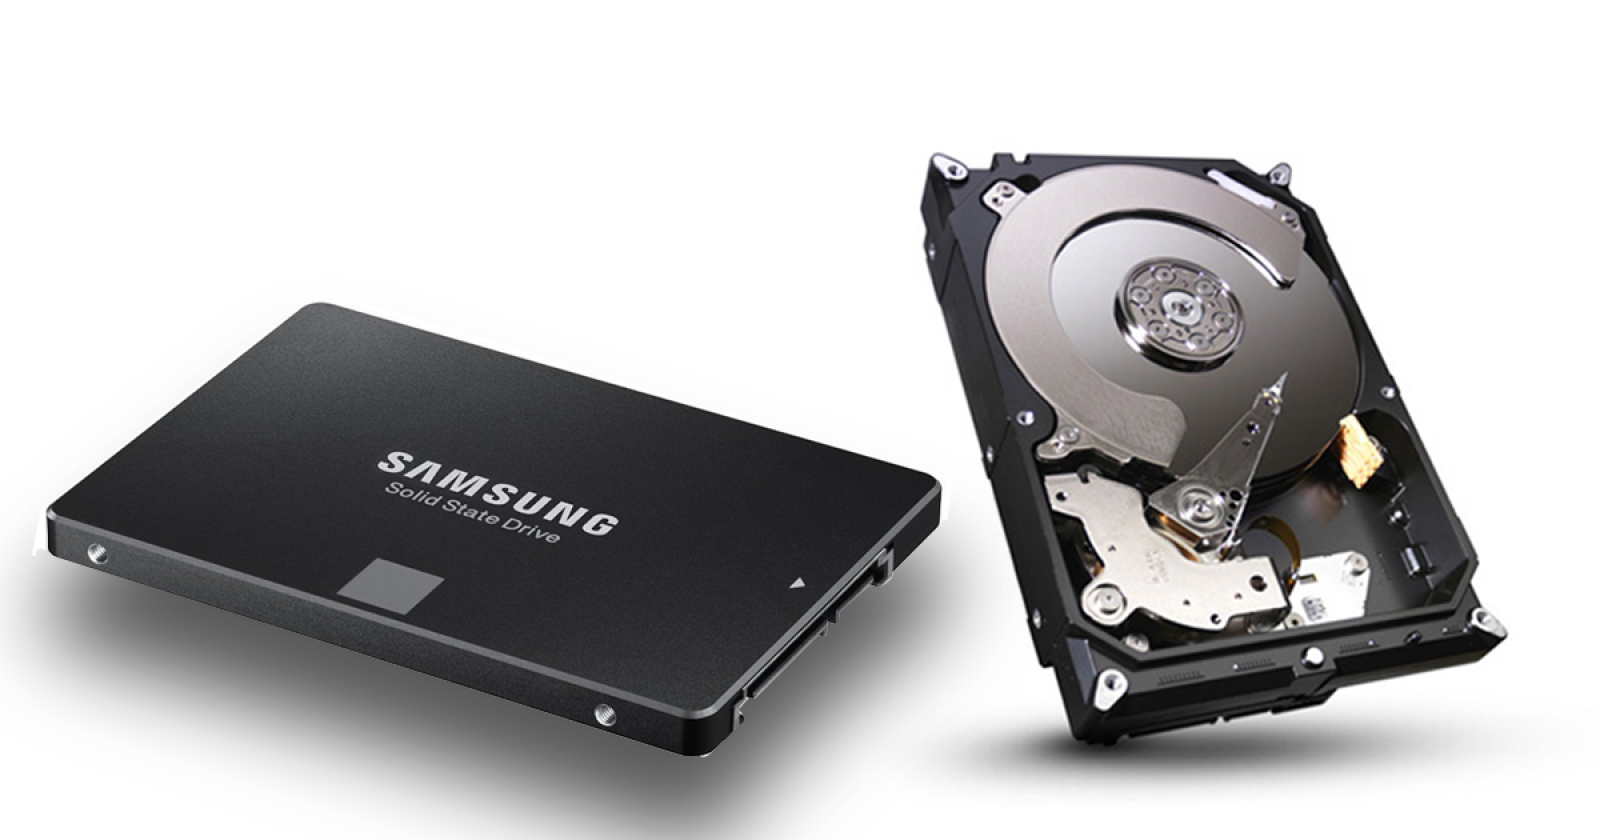 Ssd or hdd for steam фото 27